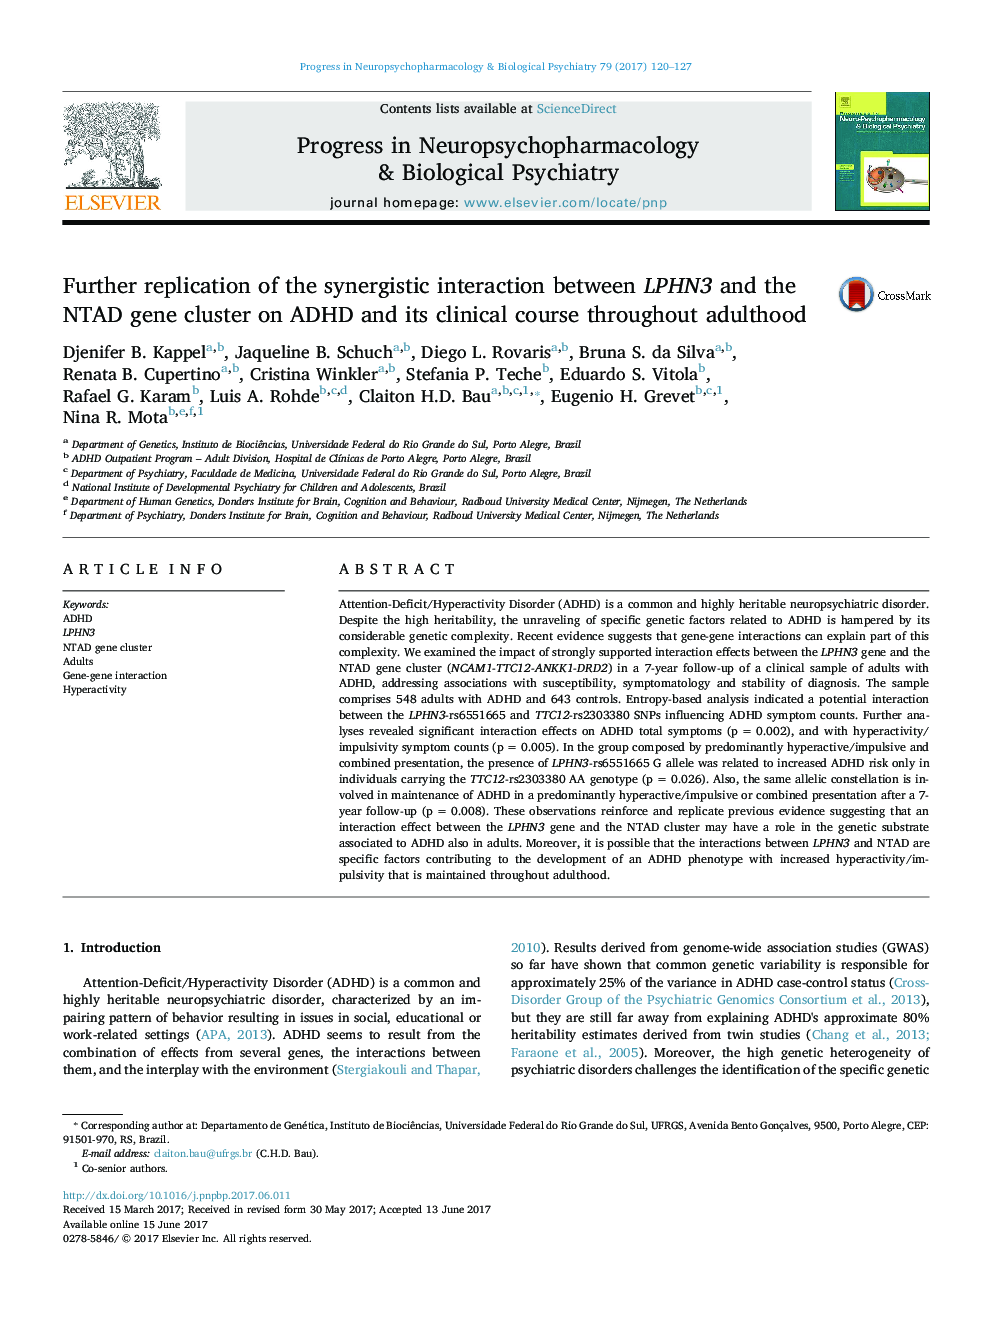 Further replication of the synergistic interaction between LPHN3 and the NTAD gene cluster on ADHD and its clinical course throughout adulthood